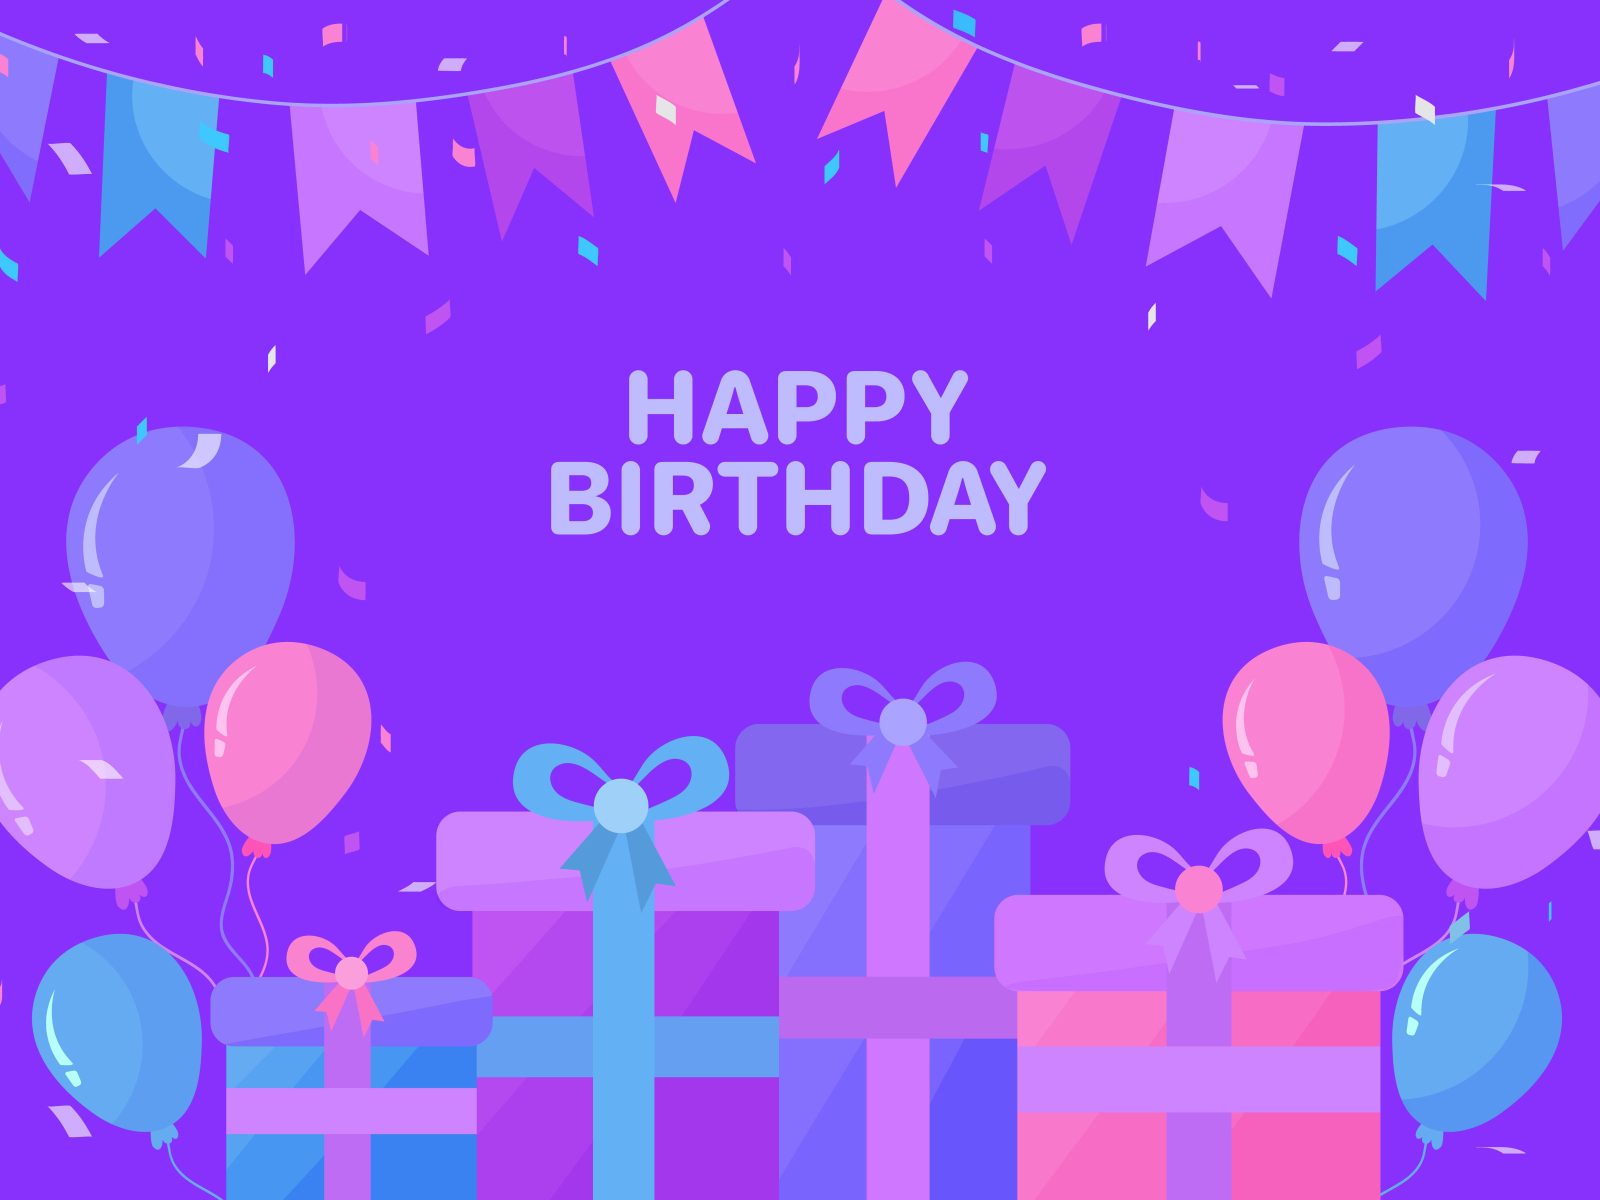 Happy birthday background with balloons and gifts by DanaR on Dribbble